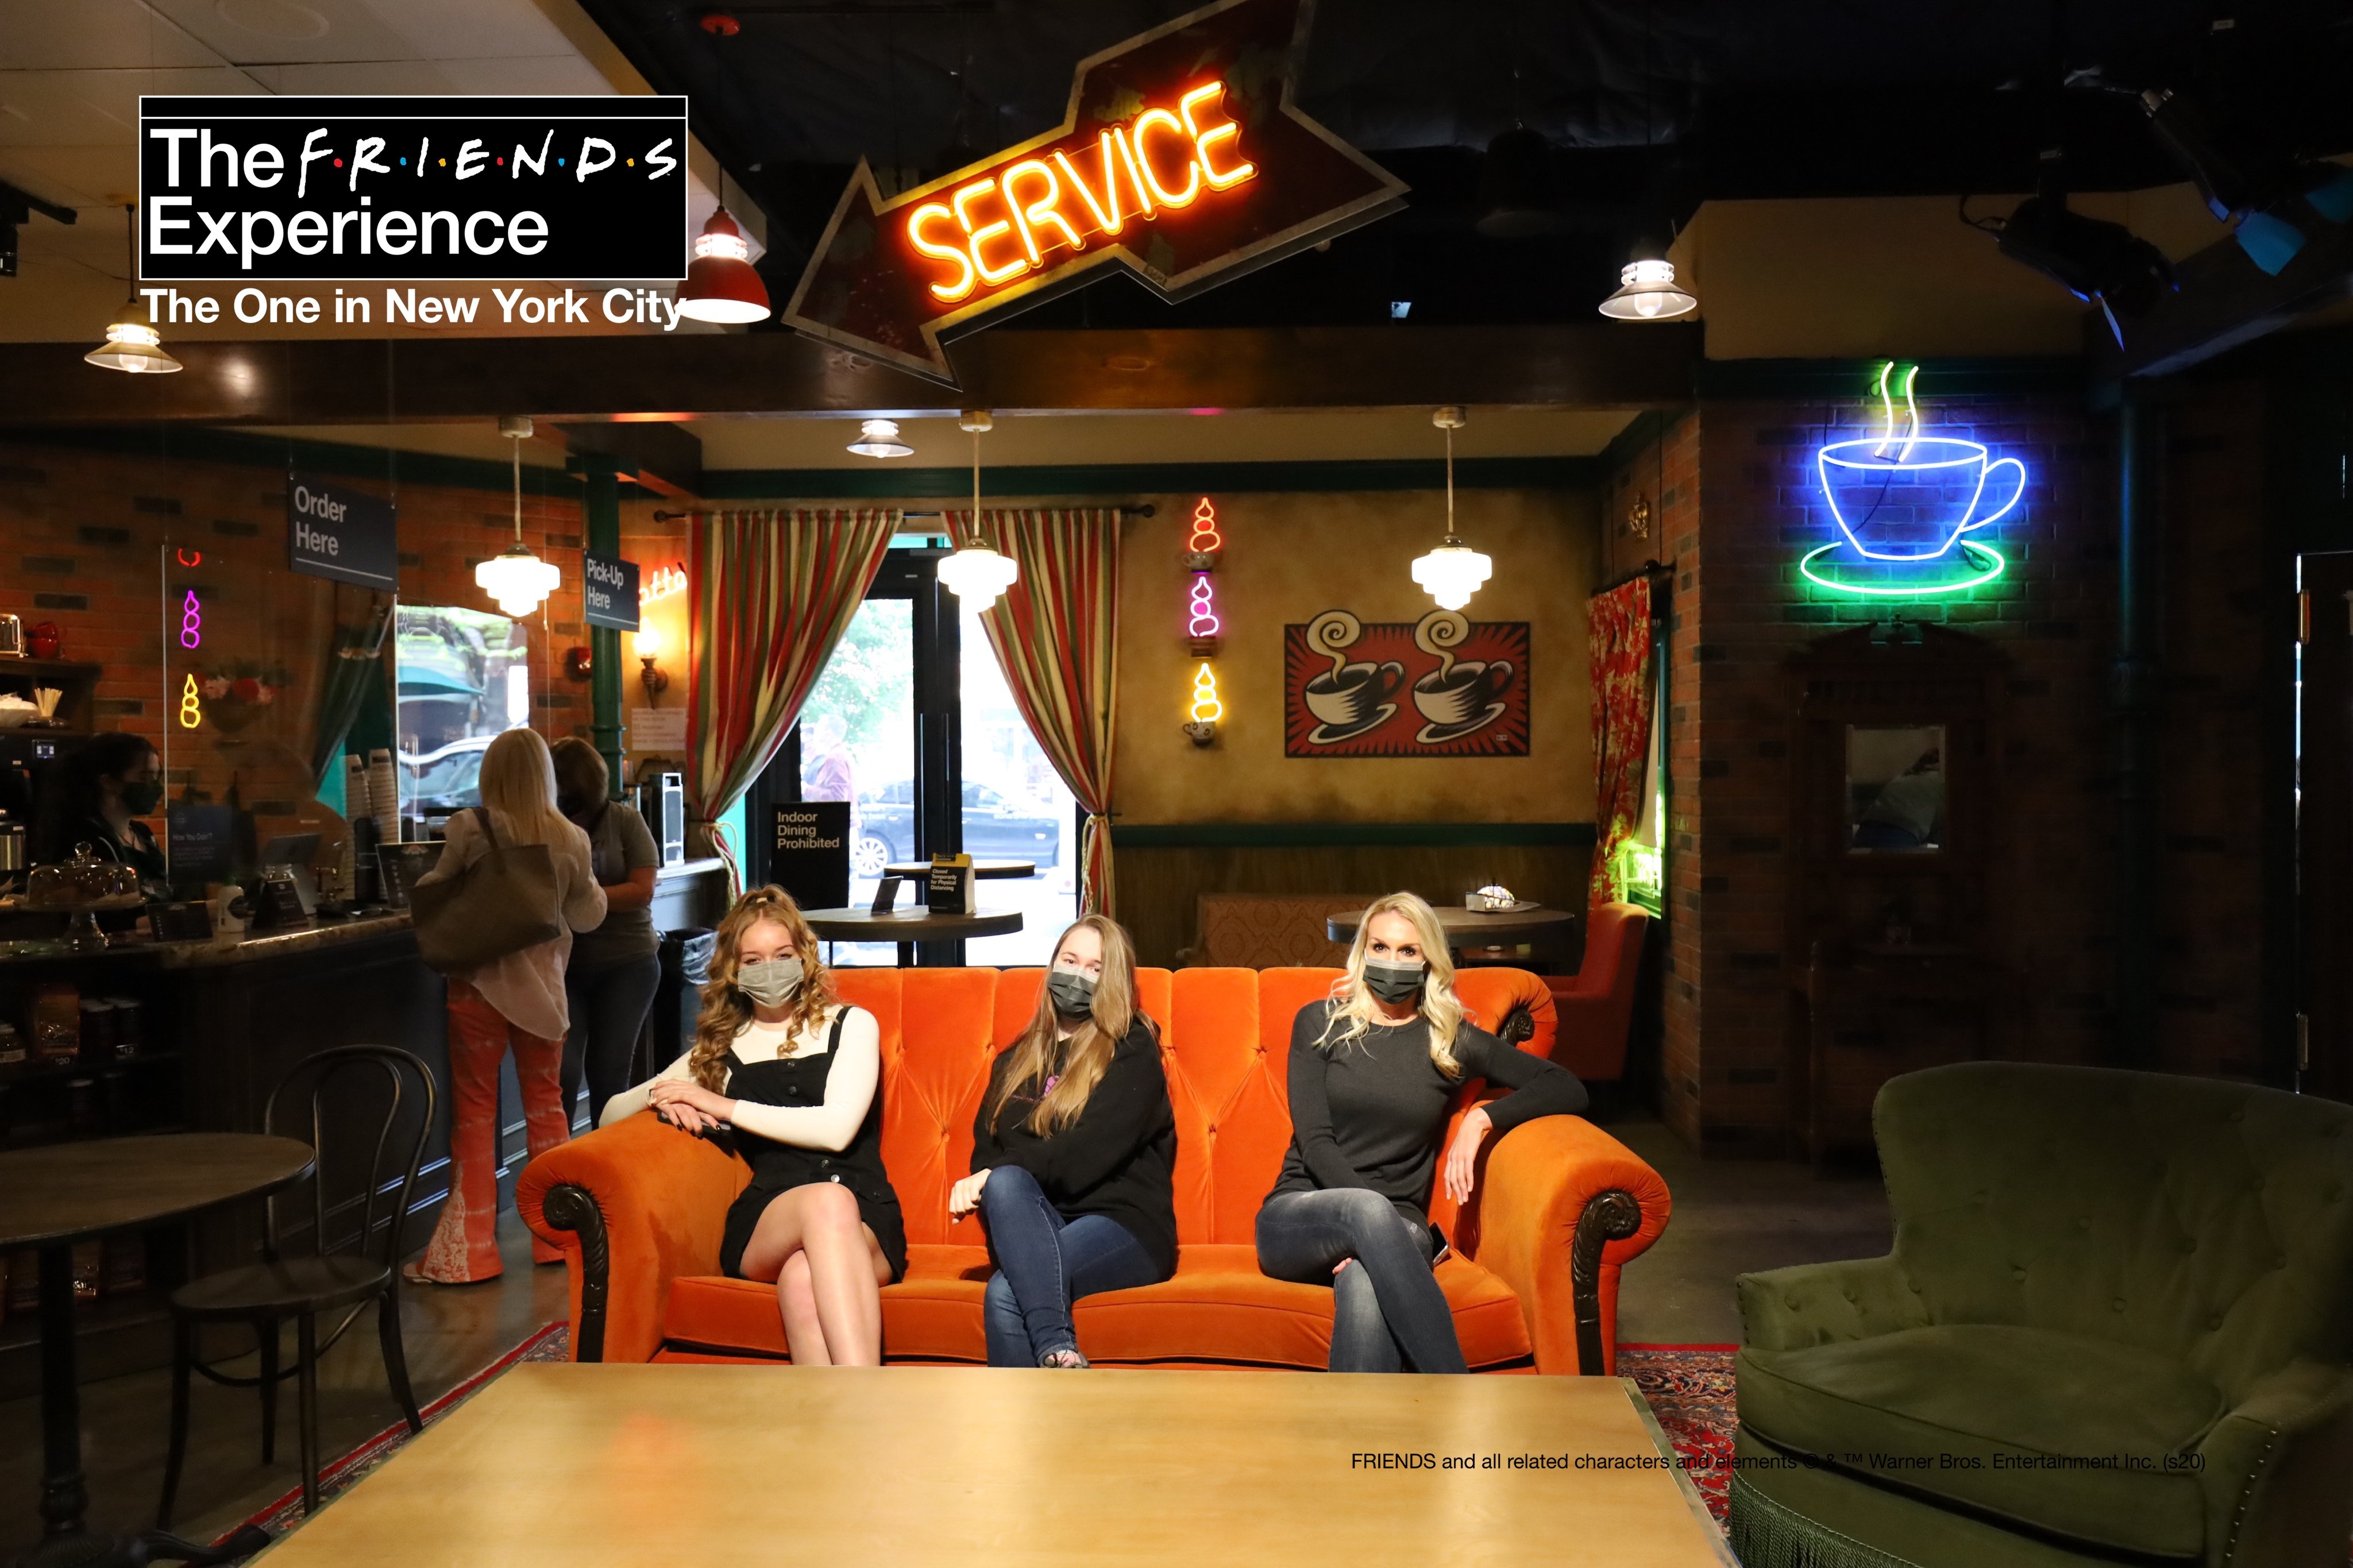 The FRIENDS Experience-The One in New York City! In Central Perk, where you could get snacks and coffee. Sit on the famous Friends orange sofa!